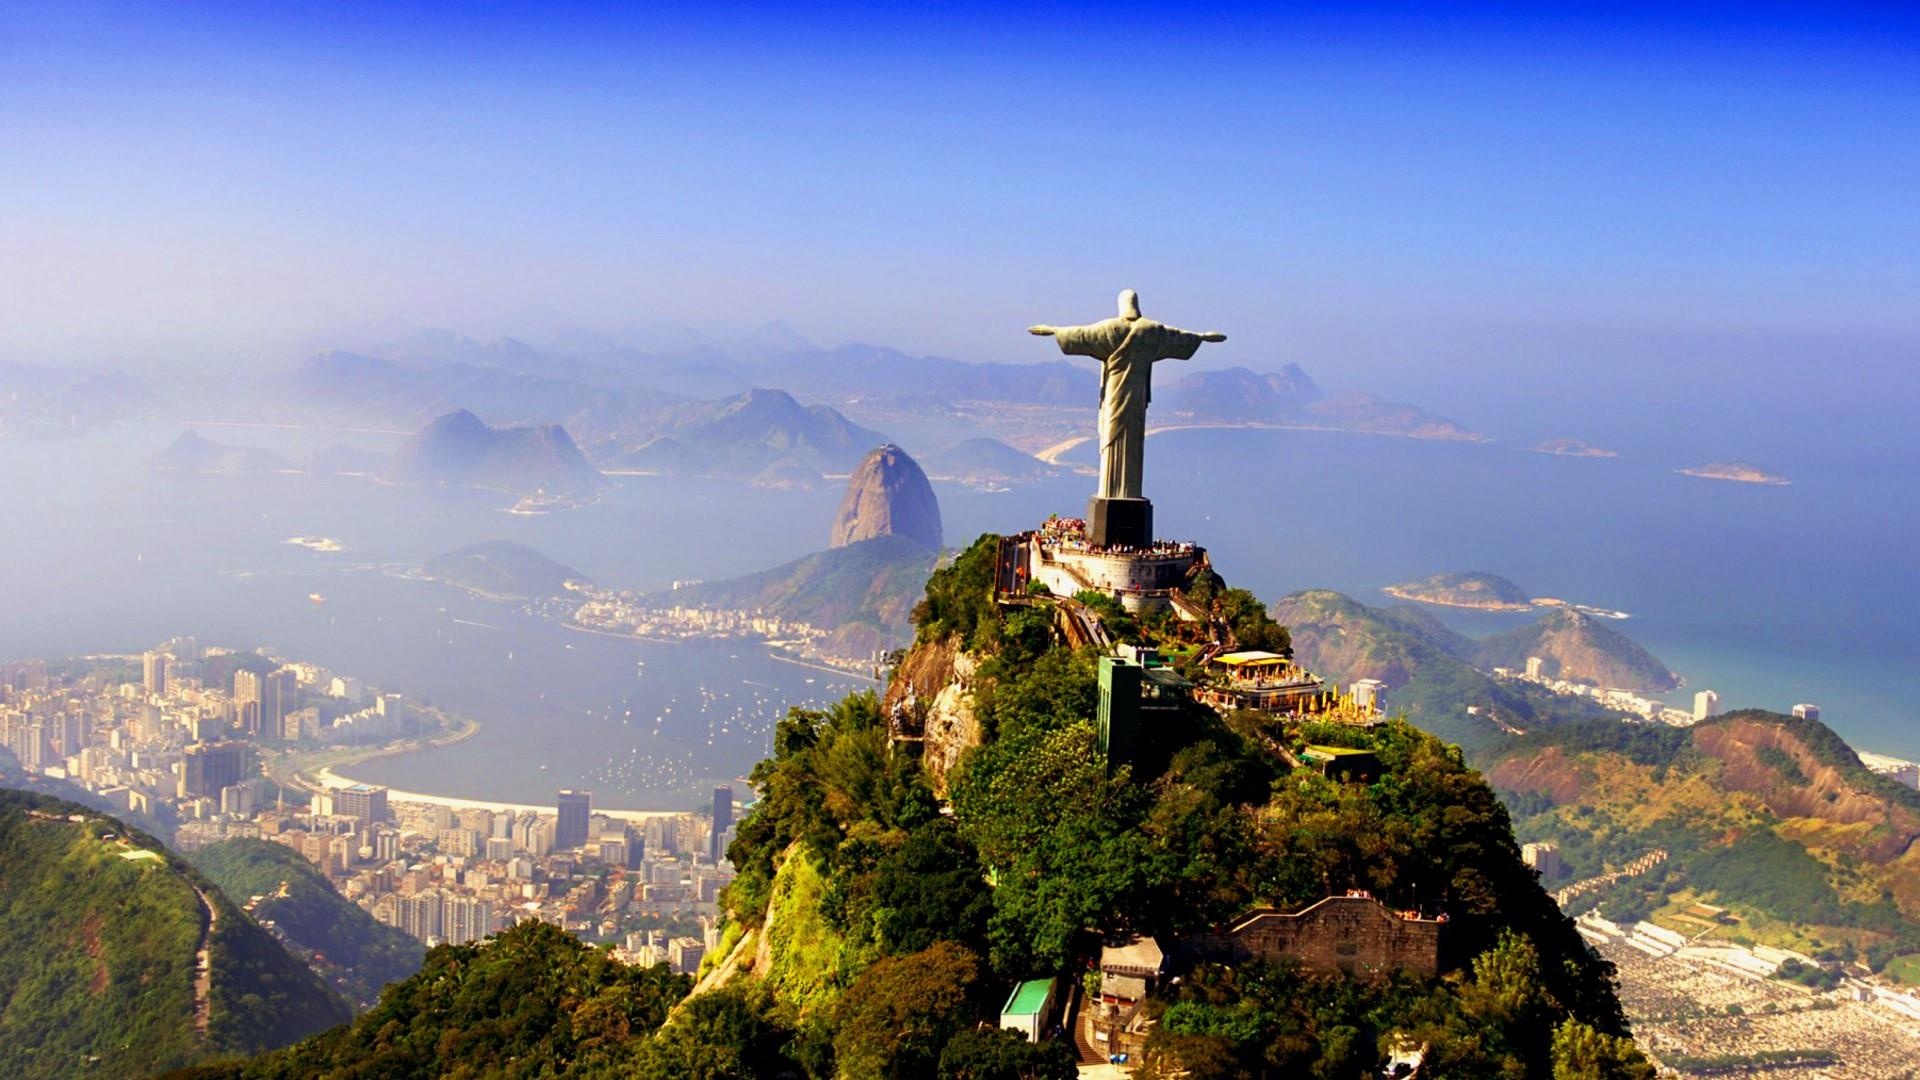 Brazil country wallpapers, Free backgrounds, Vibrant colors, Cultural pride, 1920x1080 Full HD Desktop